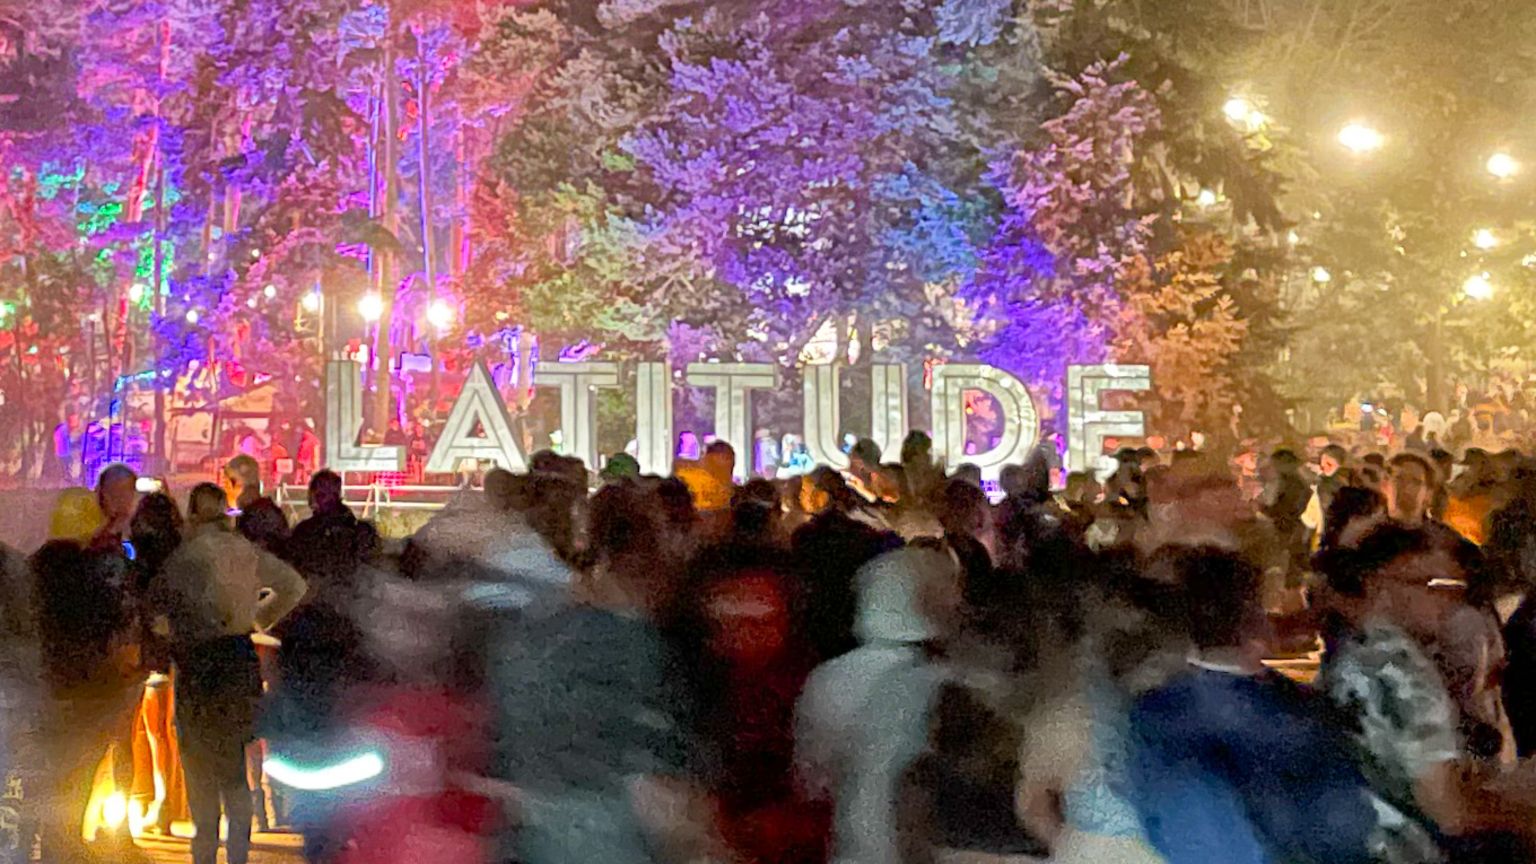 People at Latitude Festival at night